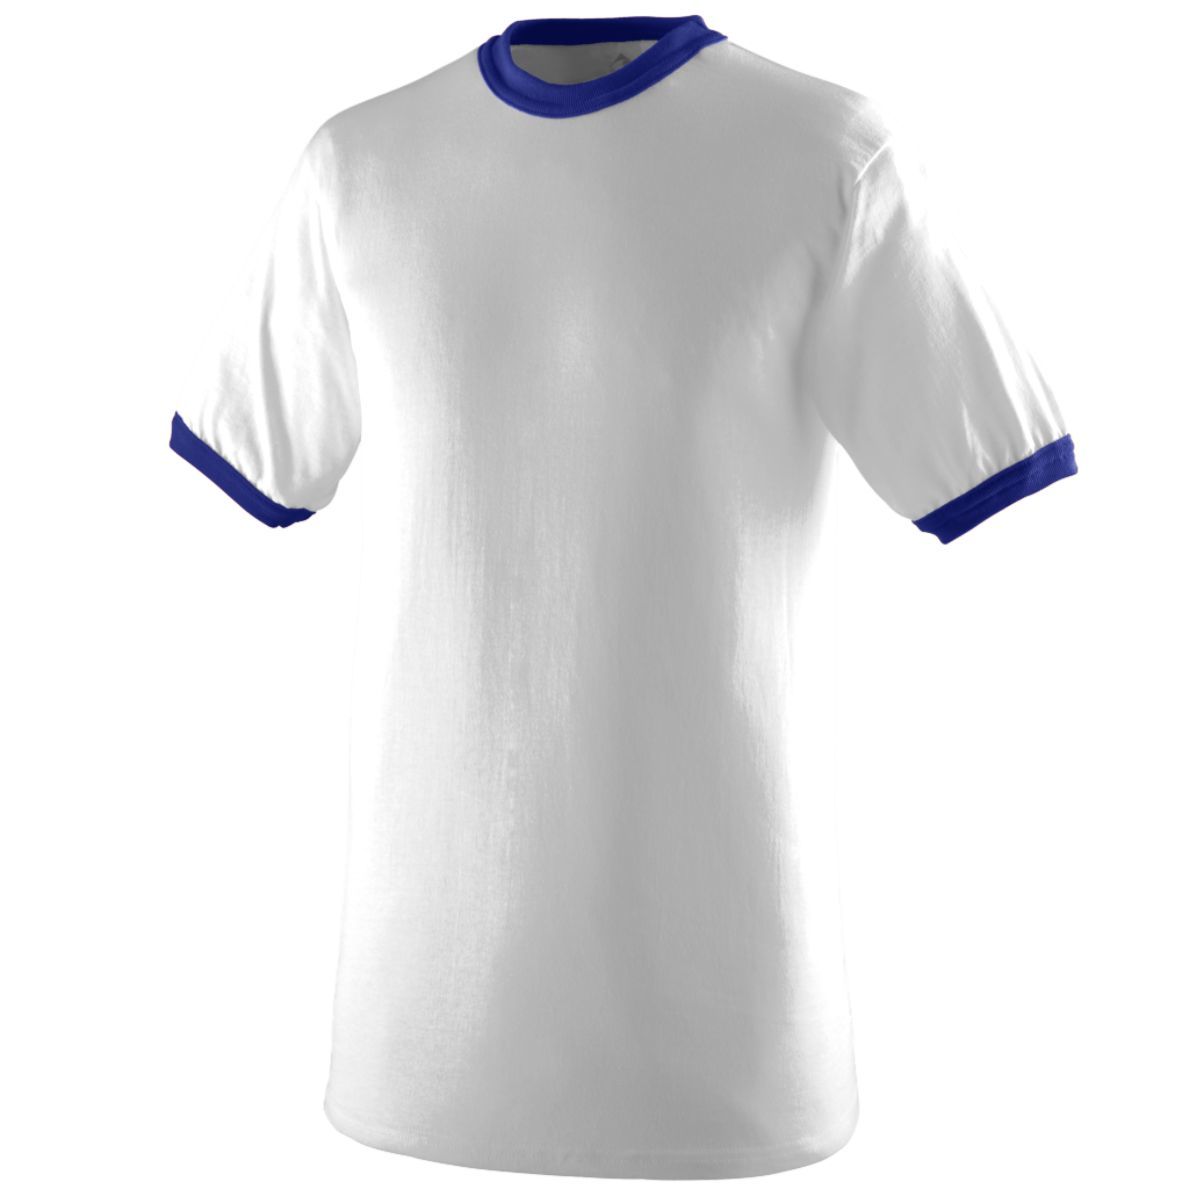 Augusta Sportswear Youth-Ringer T-Shirt in White/Purple  -Part of the Youth, Youth-Tee-Shirt, T-Shirts, Augusta-Products, Soccer, Shirts, All-Sports-1 product lines at KanaleyCreations.com